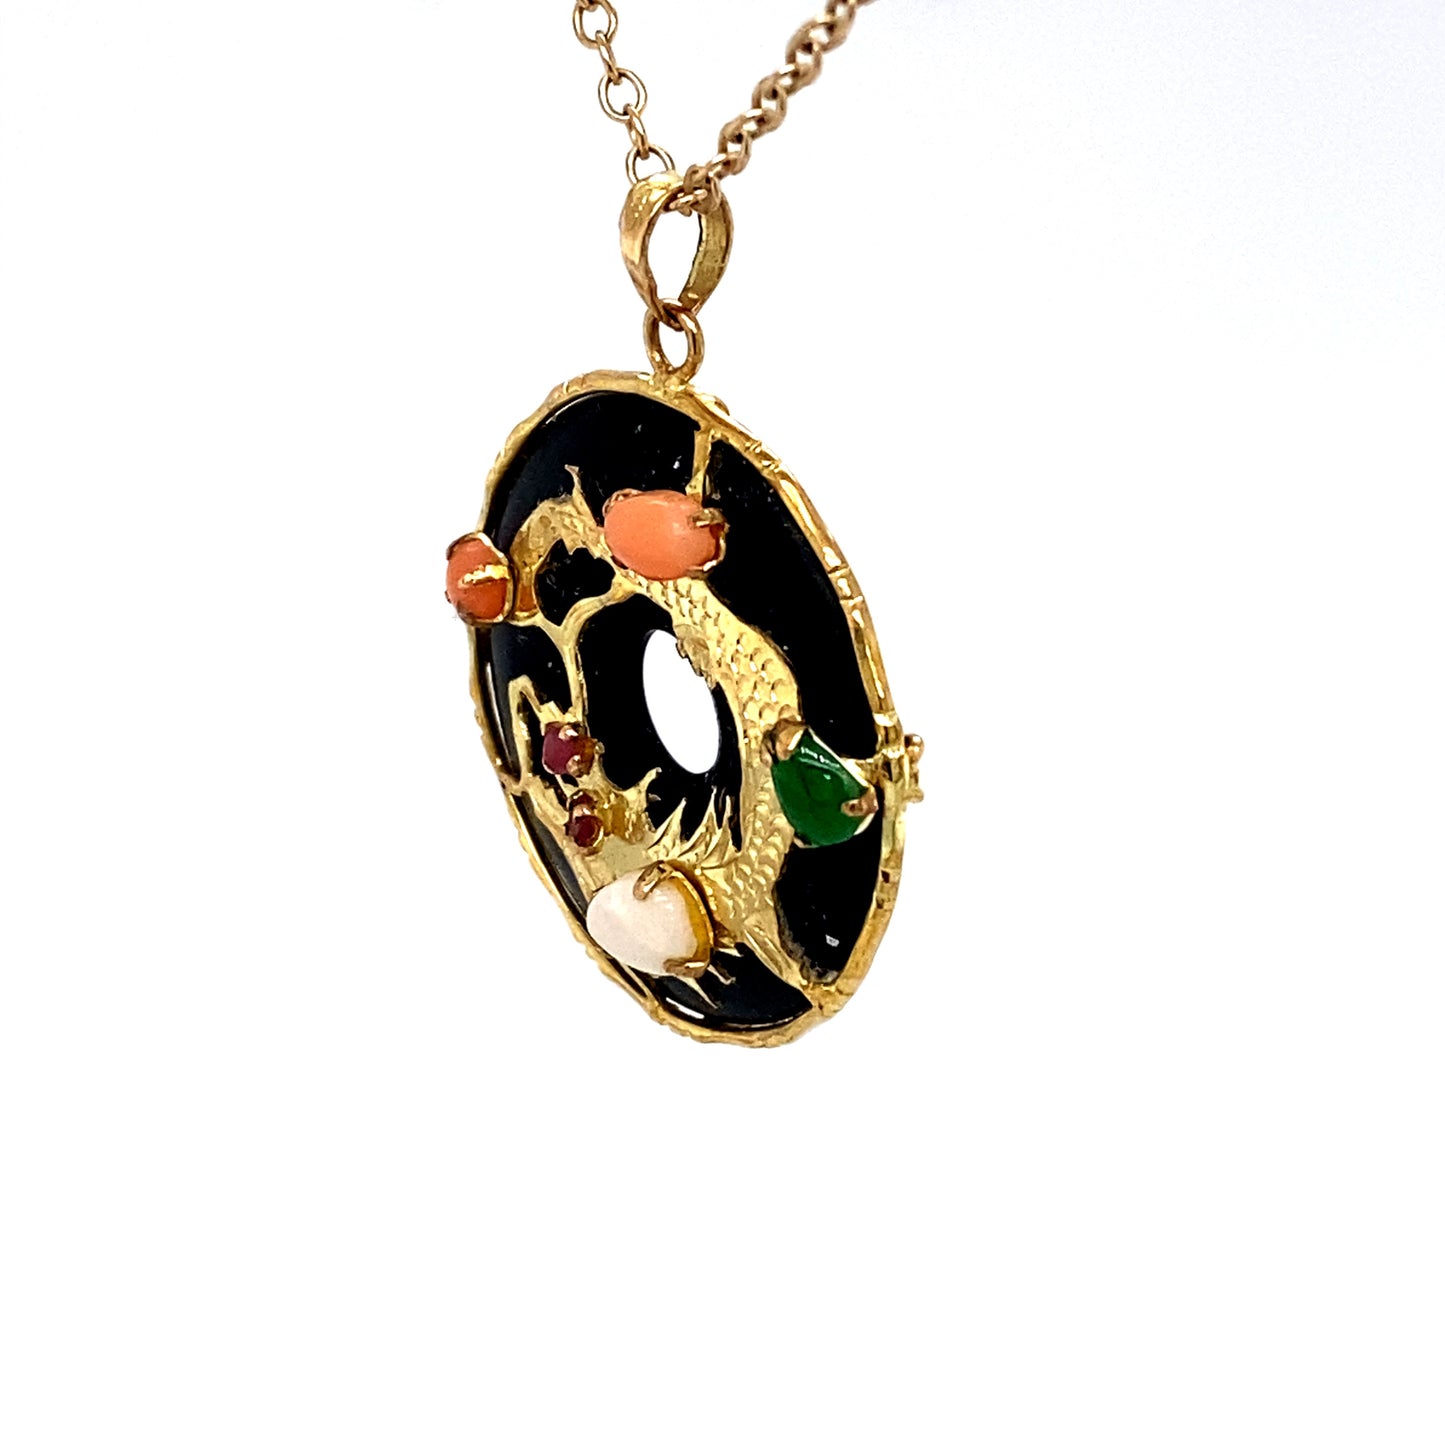 Circa 1980 Dragon Disc Pendant with Coral, Ruby, Opal and Jade in 14 Karat Gold